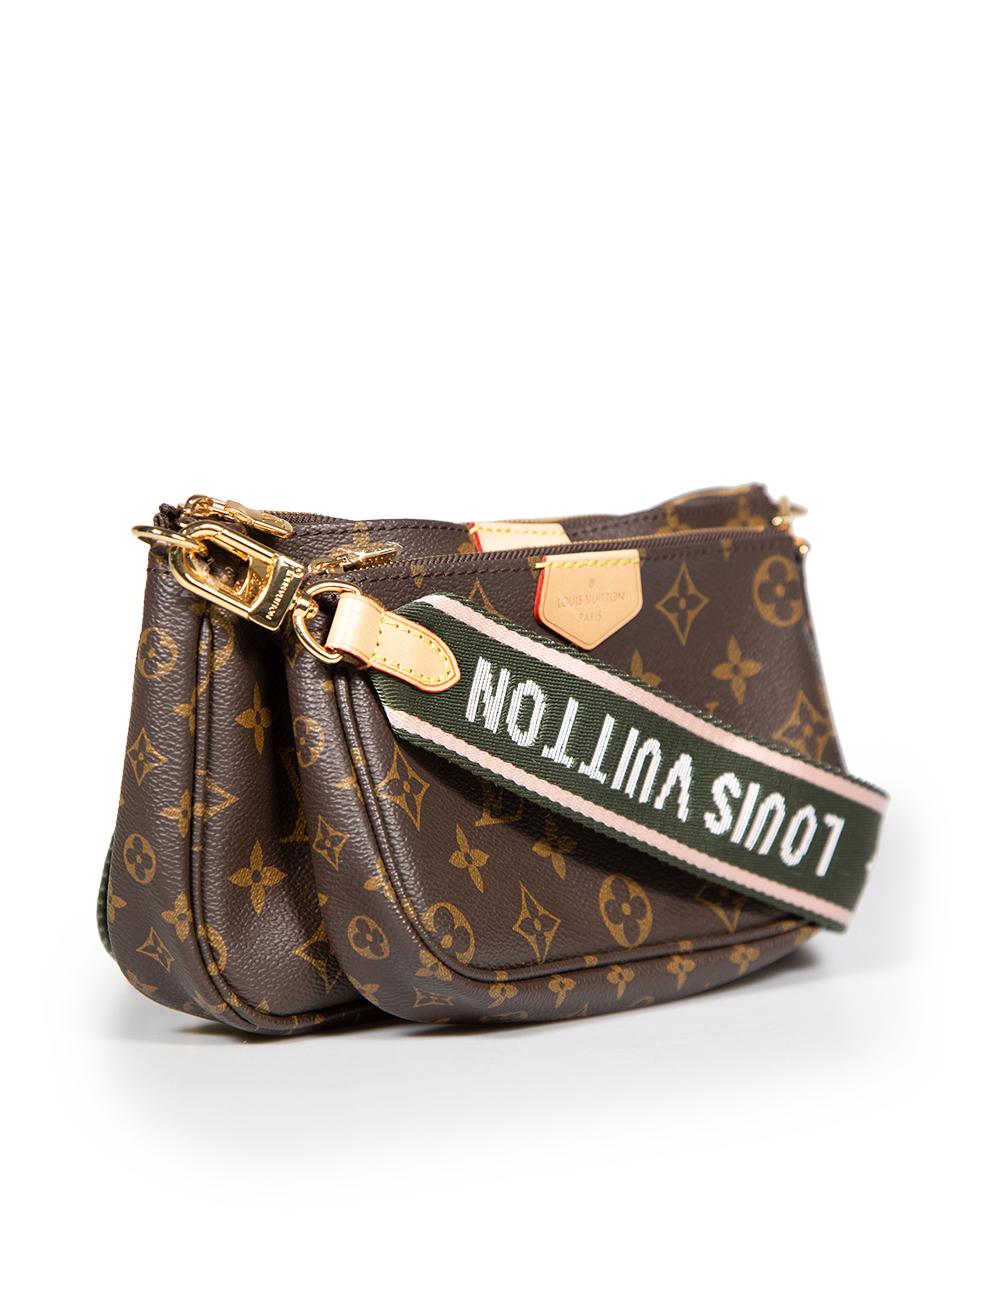 CONDITION is Never worn. No visible wear to the bag is evident on this new Louis Vuitton designer resale item. This item comes with an original dust bag.
 
 
 
 Details
 
 
 Model: Multi Pochette Accessoires
 
 Datecode: SP3119 (2019)
 
 Brown
 
